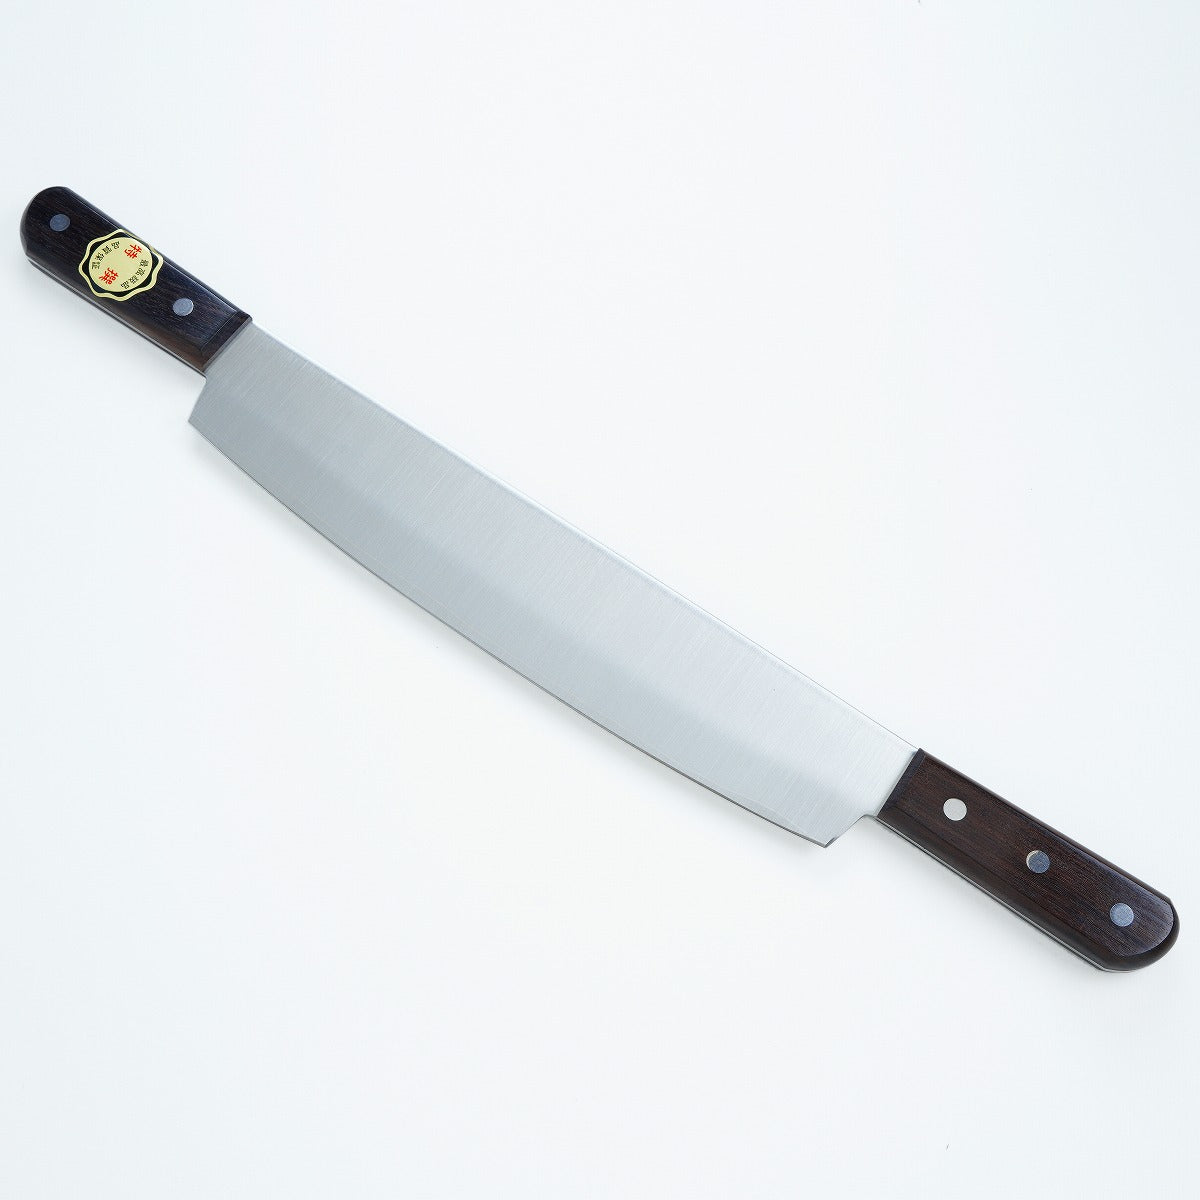 Double Handled "Reito Bocho (Frozen-food Kitchen Knife)" for Business Use 300mm (abt 11.8") with Leather Sheath